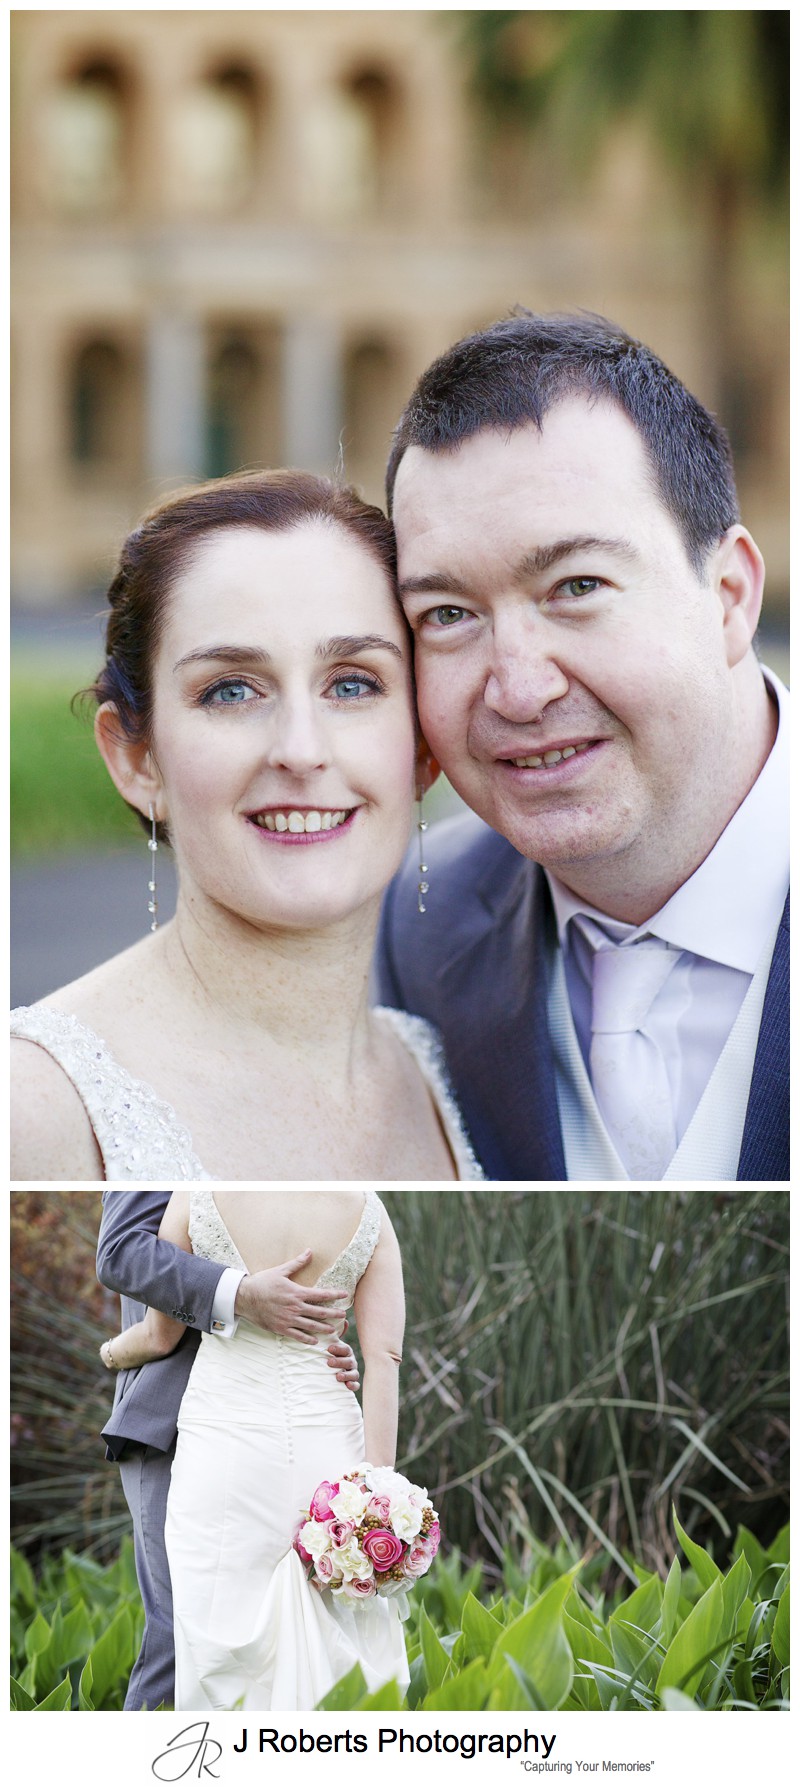 Portrait of a bride and groom - sydney wedding photography 